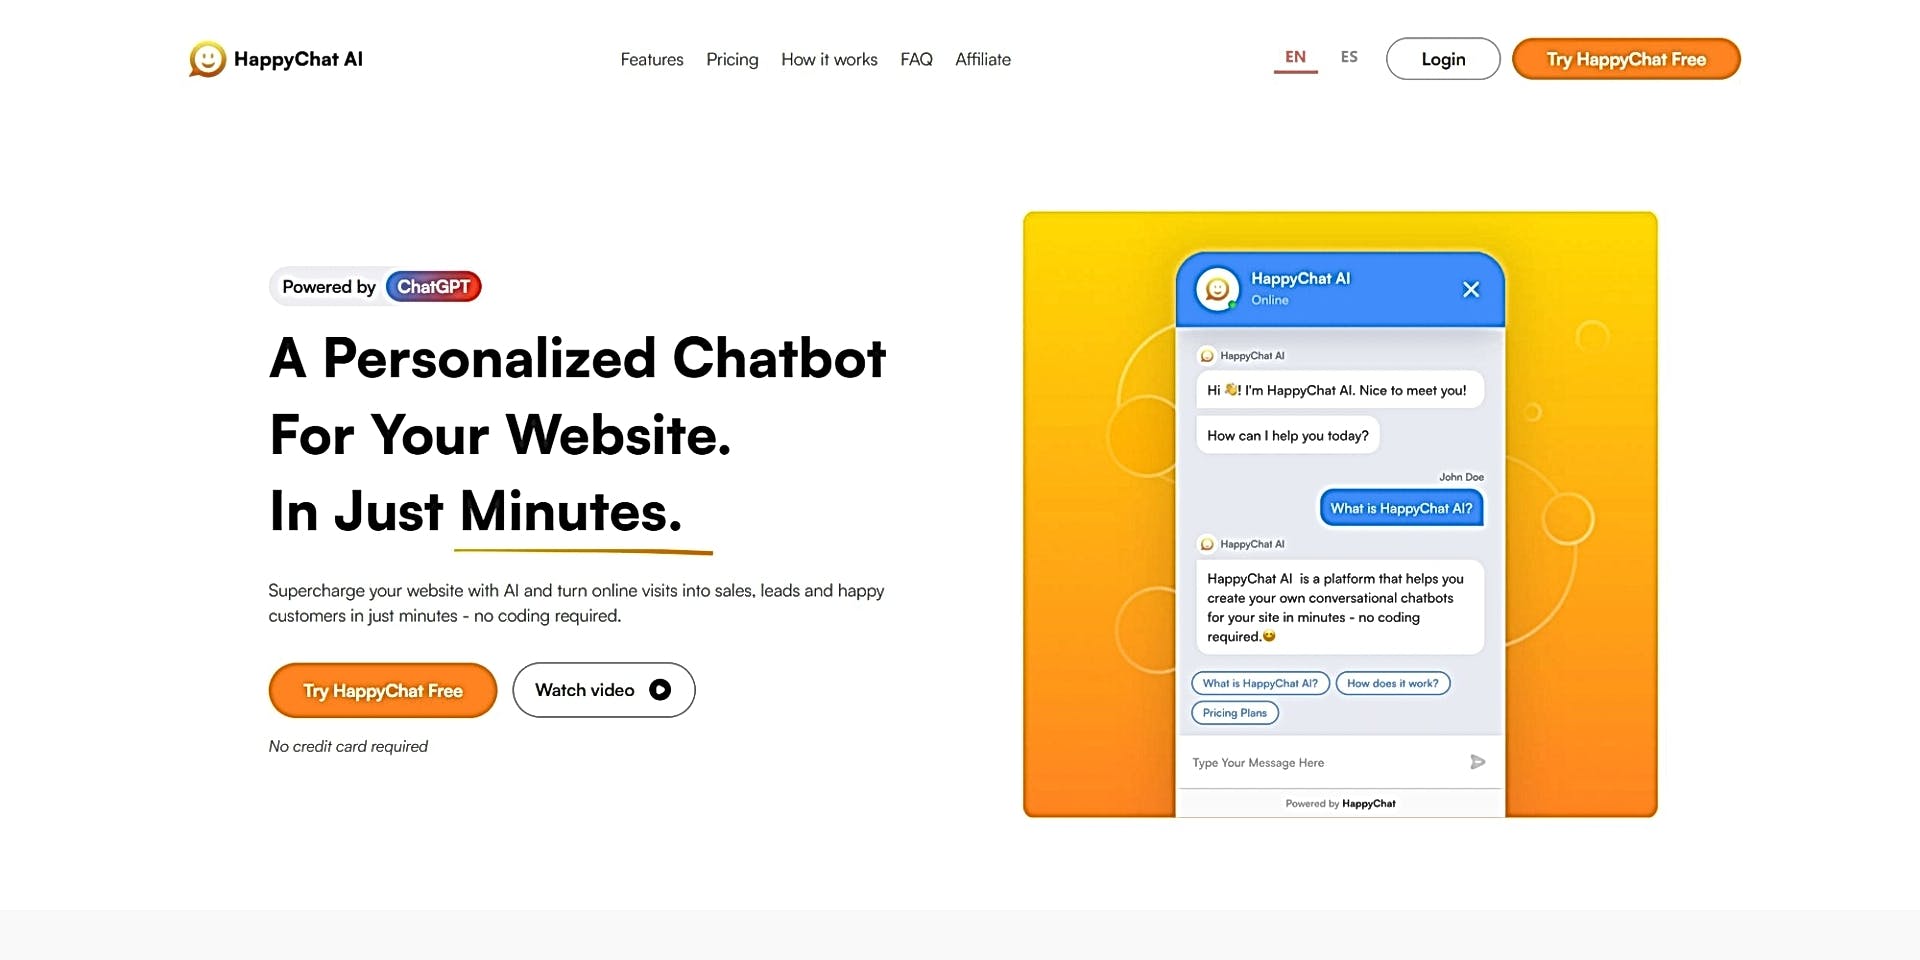 HappyChat AI featured